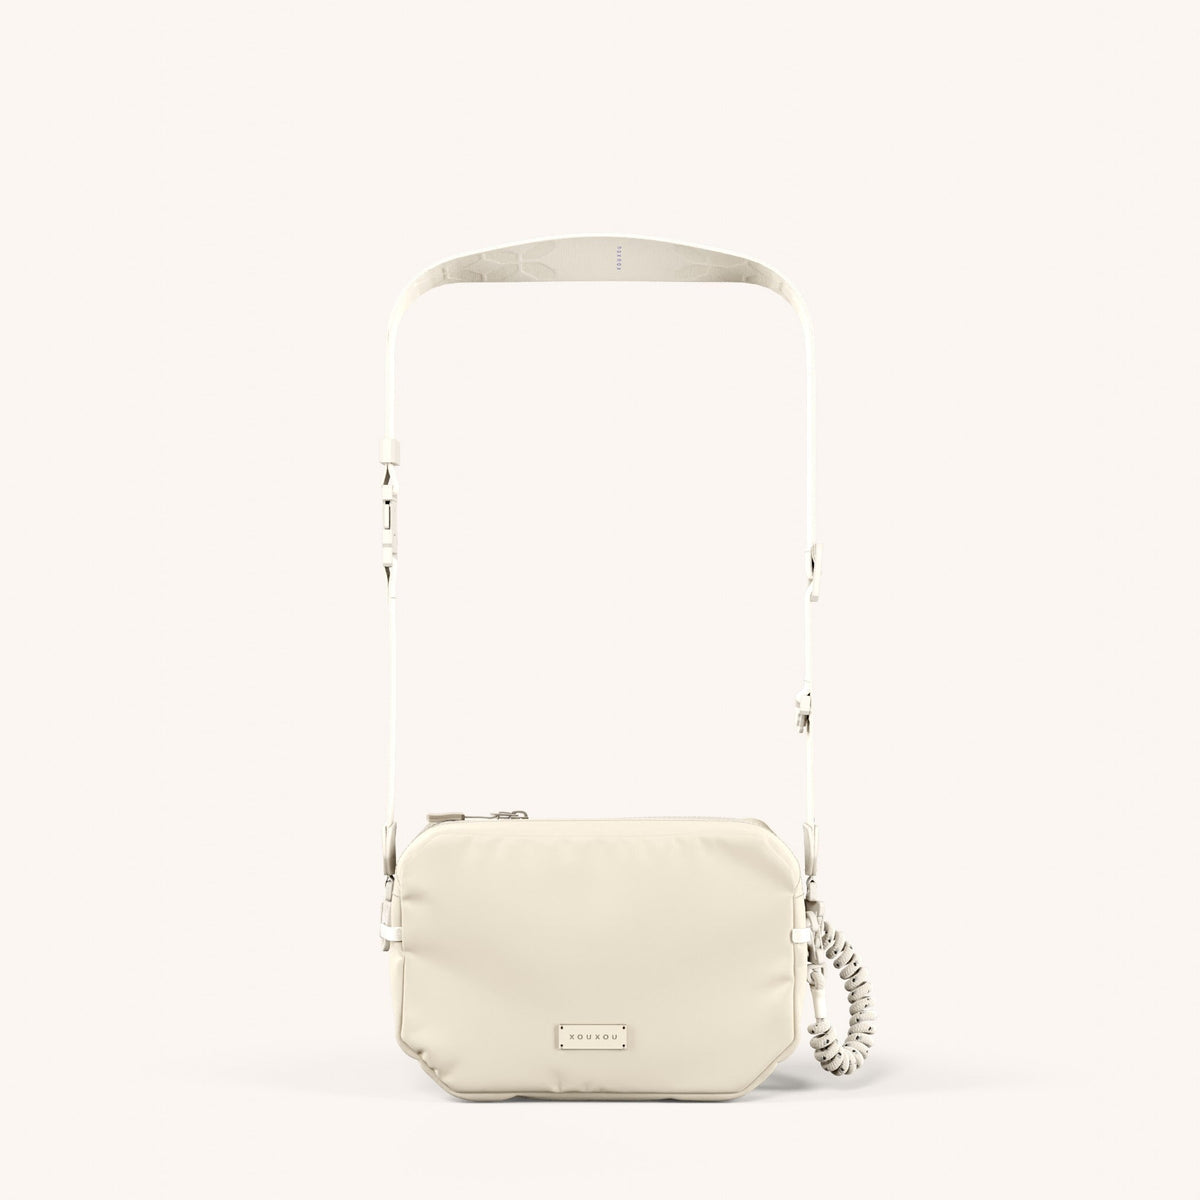 Crossbody Bag with Ultrawide Lanyard in Chalk Total View | XOUXOU